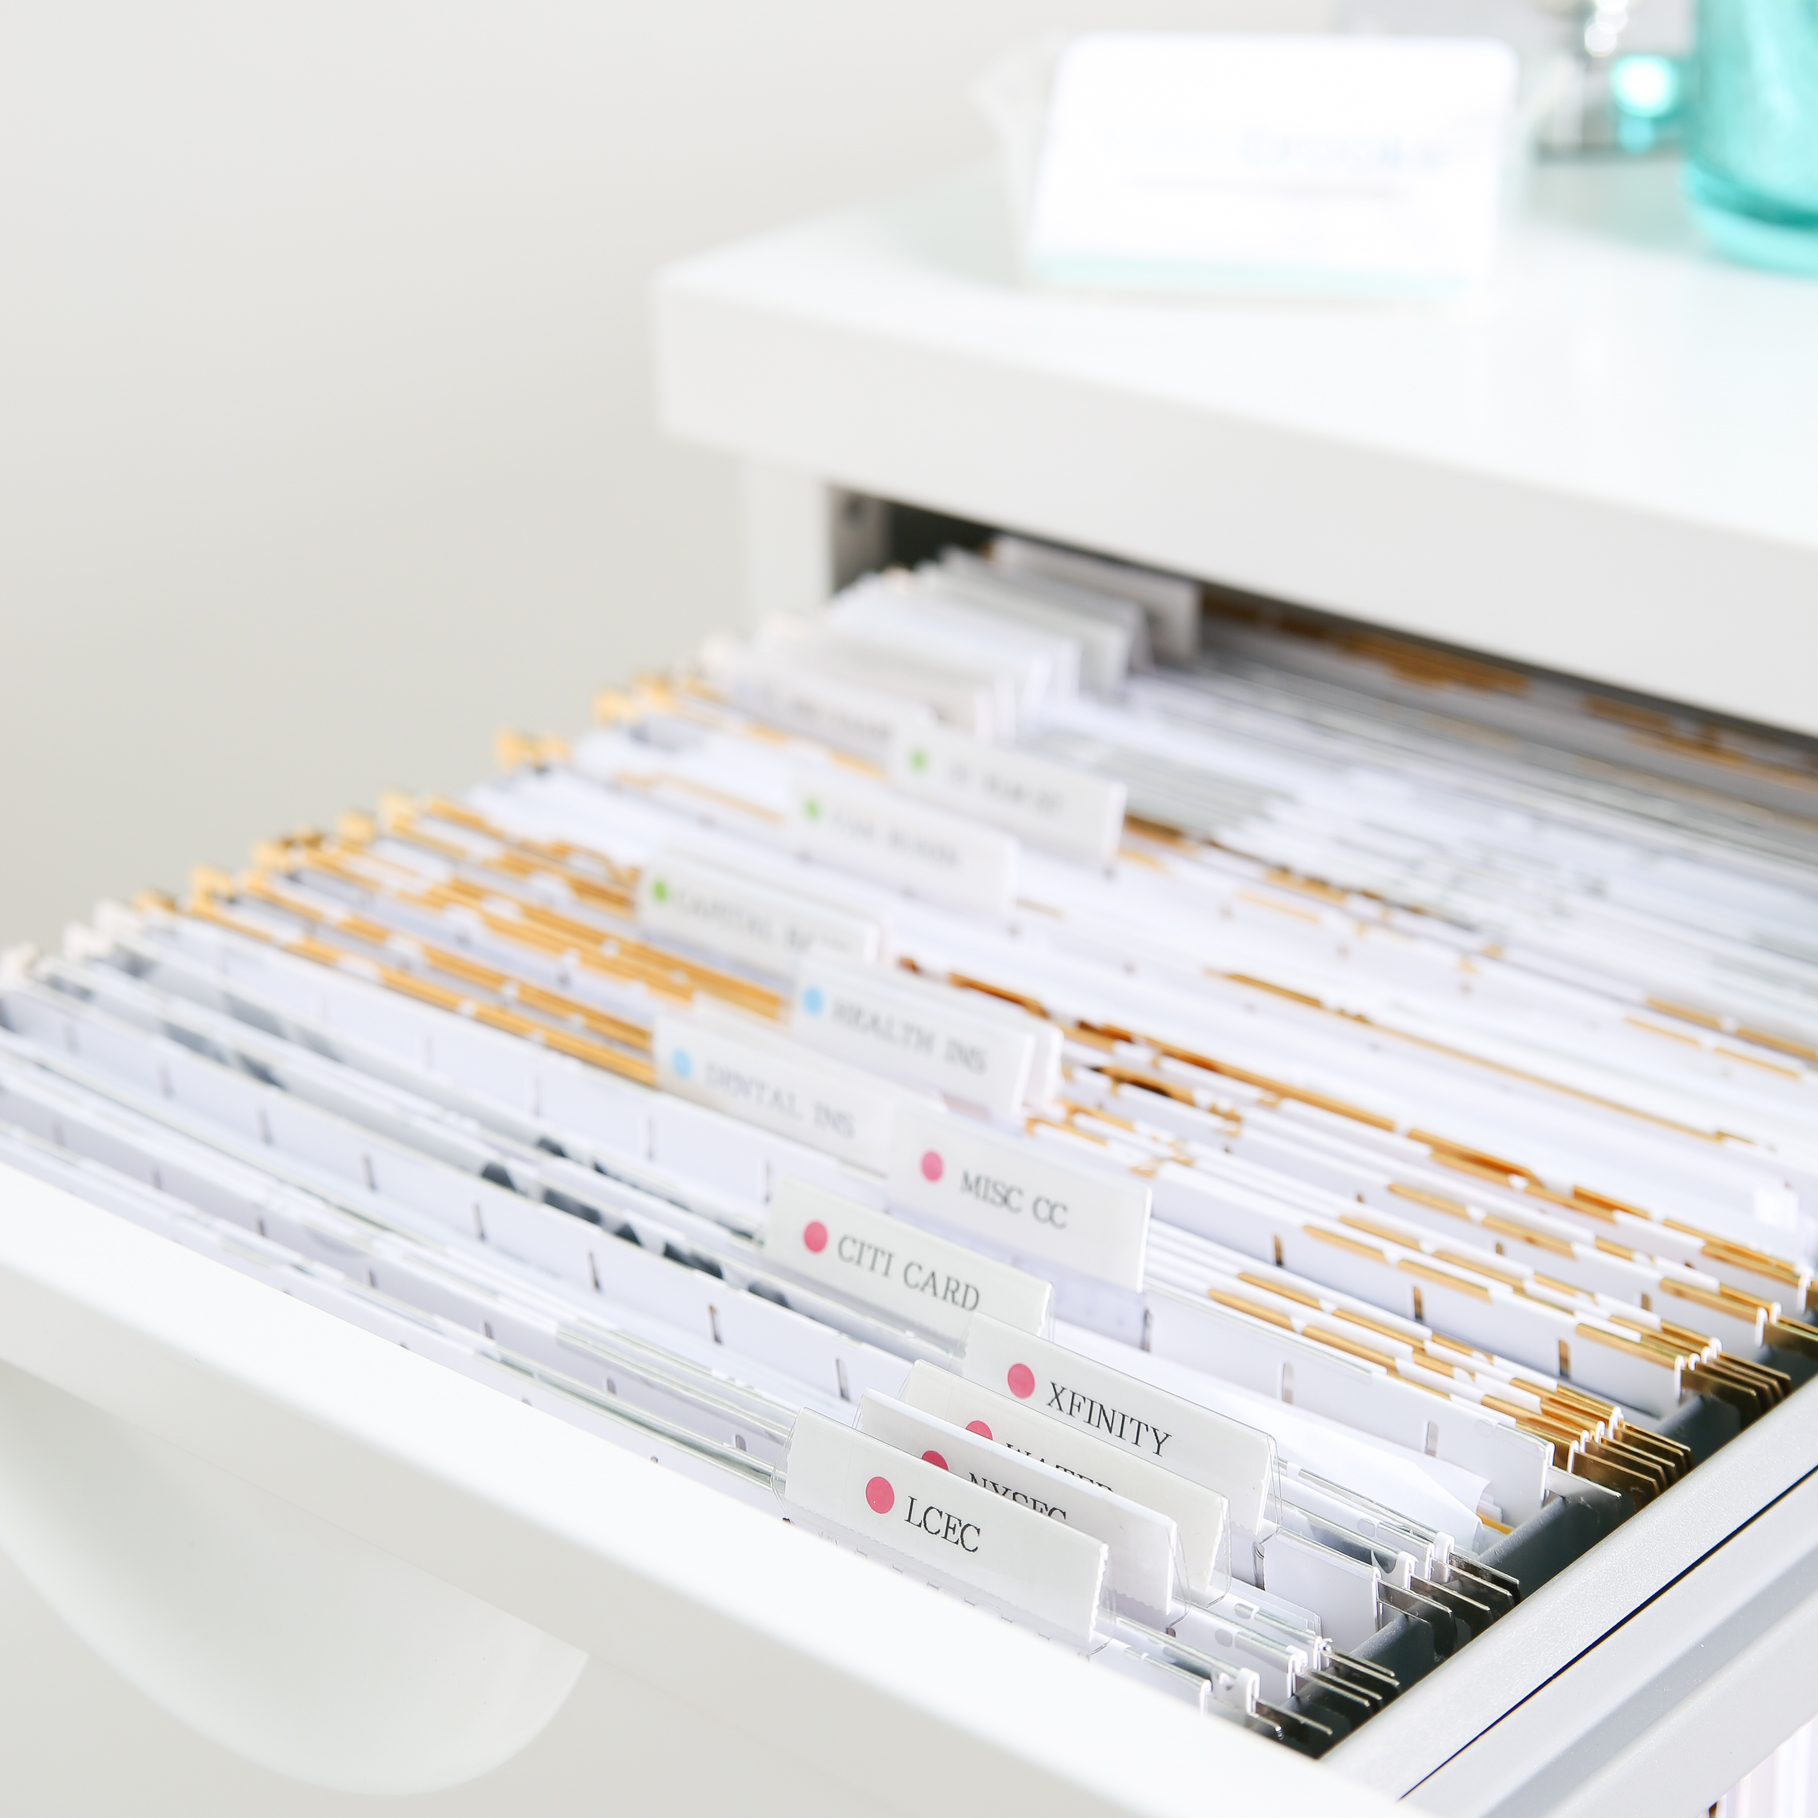 Filing Cabinet Declutter: How to Organize All Your Important Paperwork